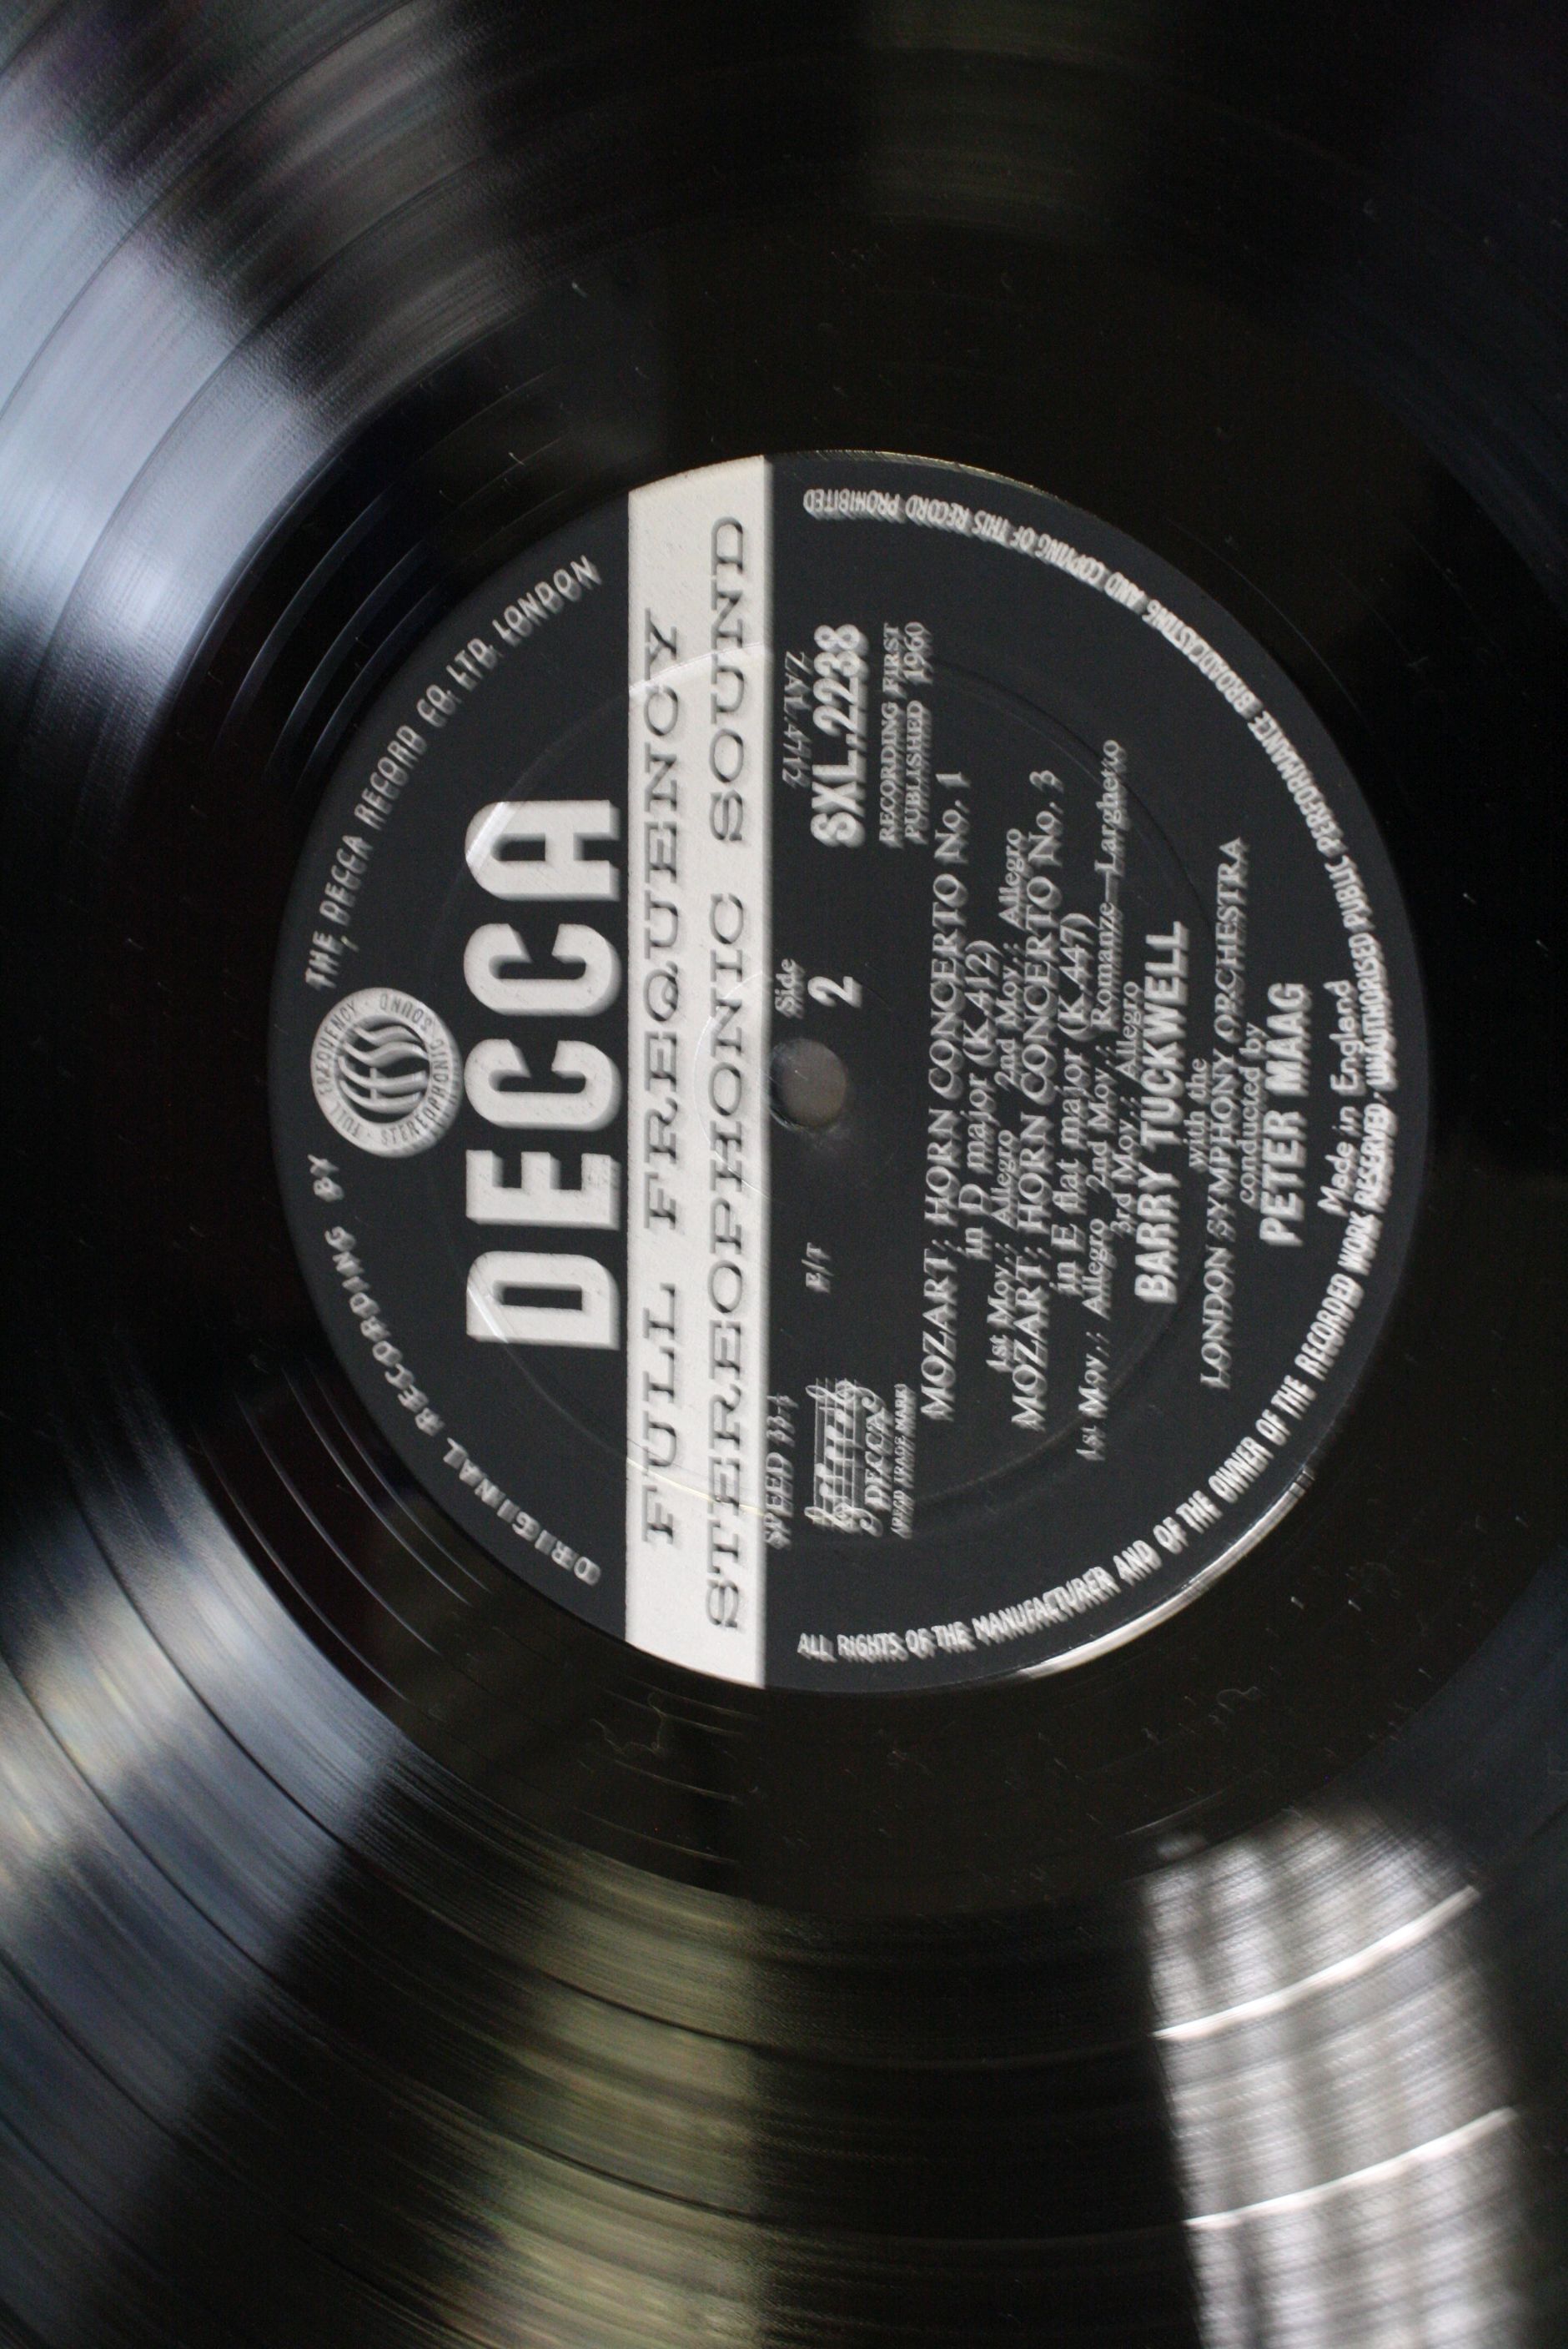 Vinyl - Vinyl Records - Classical - 7 Original ED 1 Stereo albums and Two 10” on Decca Records, - Image 9 of 27